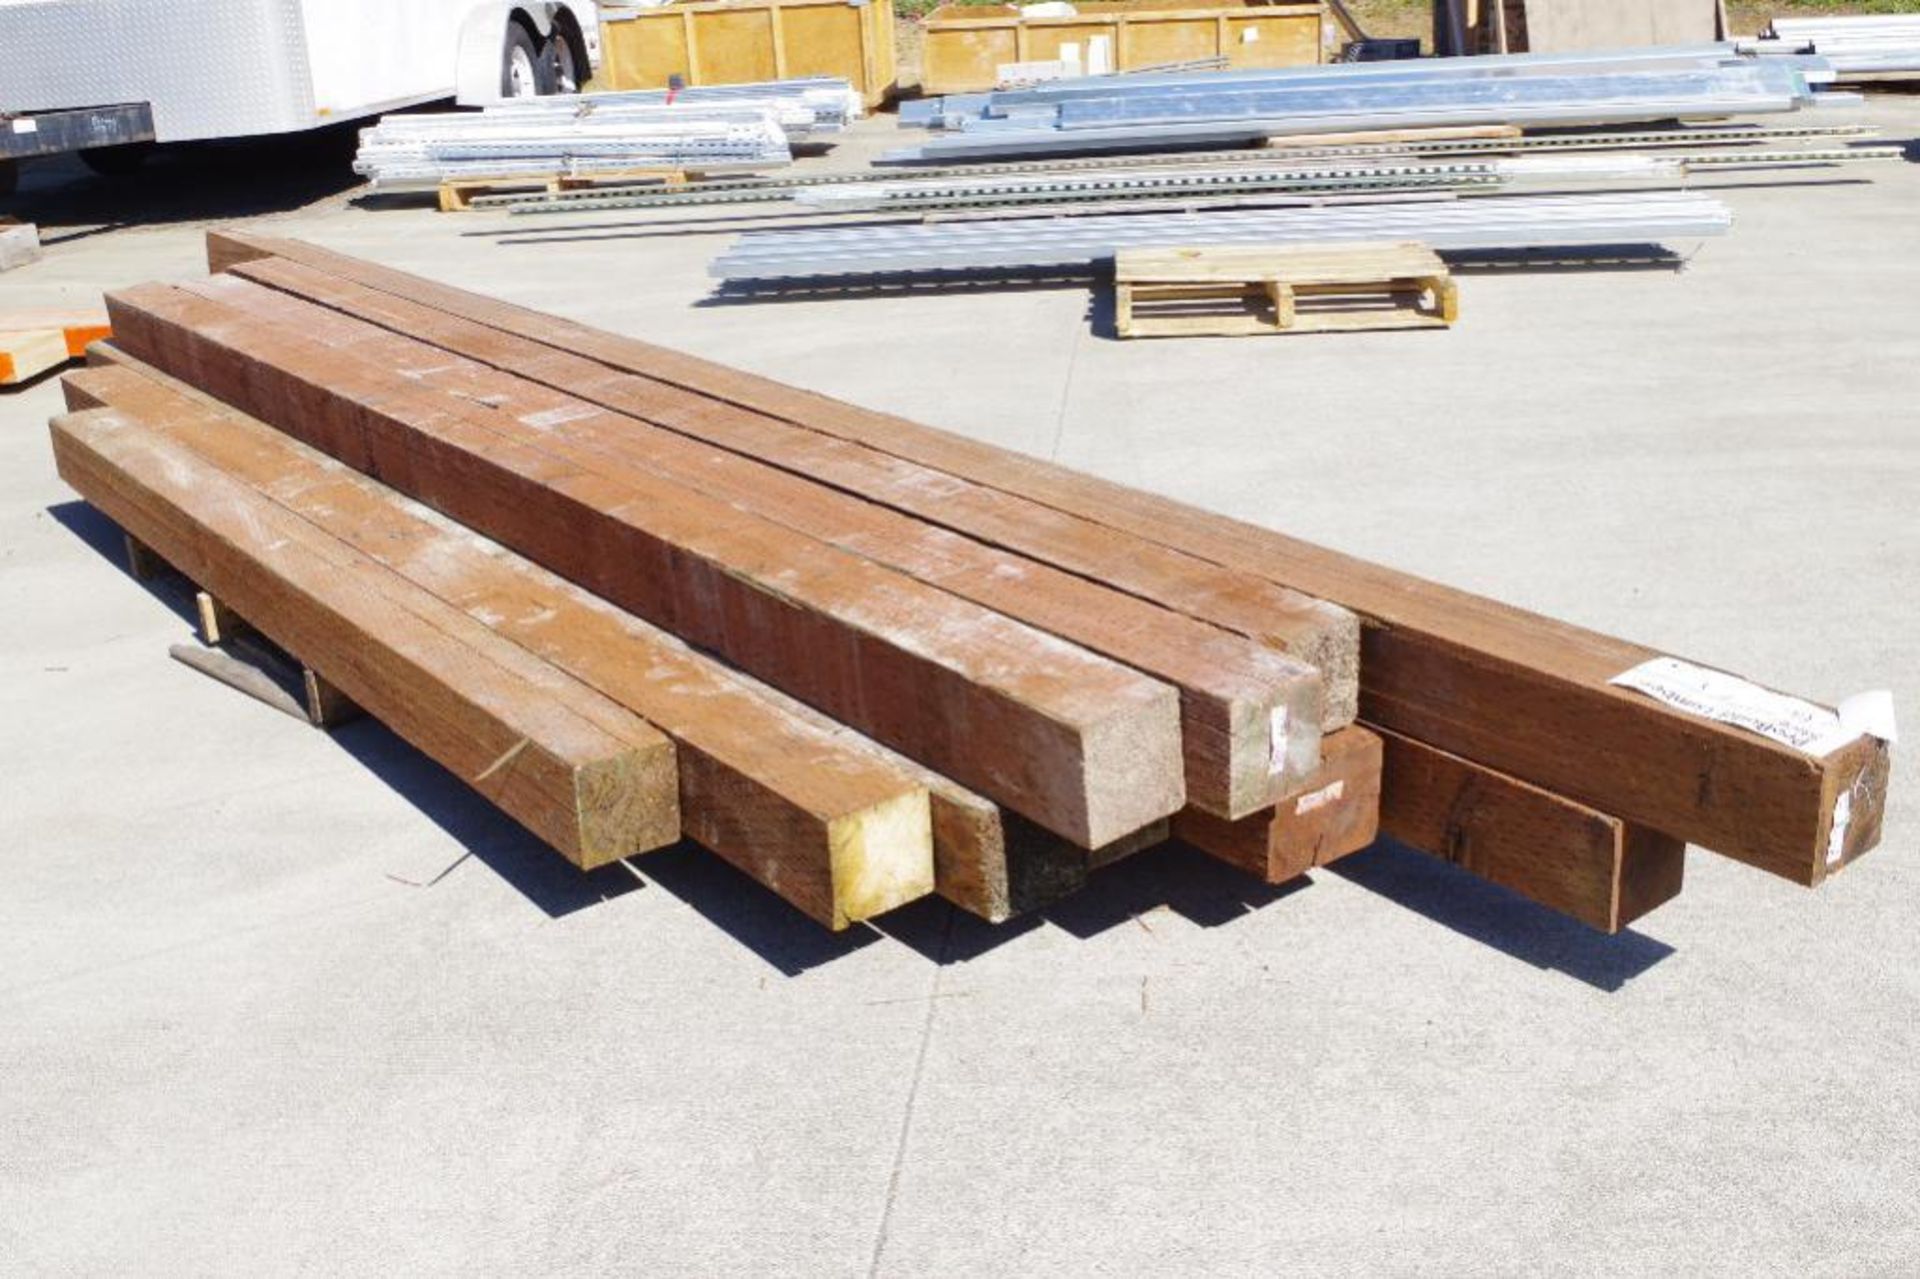 [11] Pressure Treated Beams; Timber(s) have defects (cracks, knots, warpage); Must preview